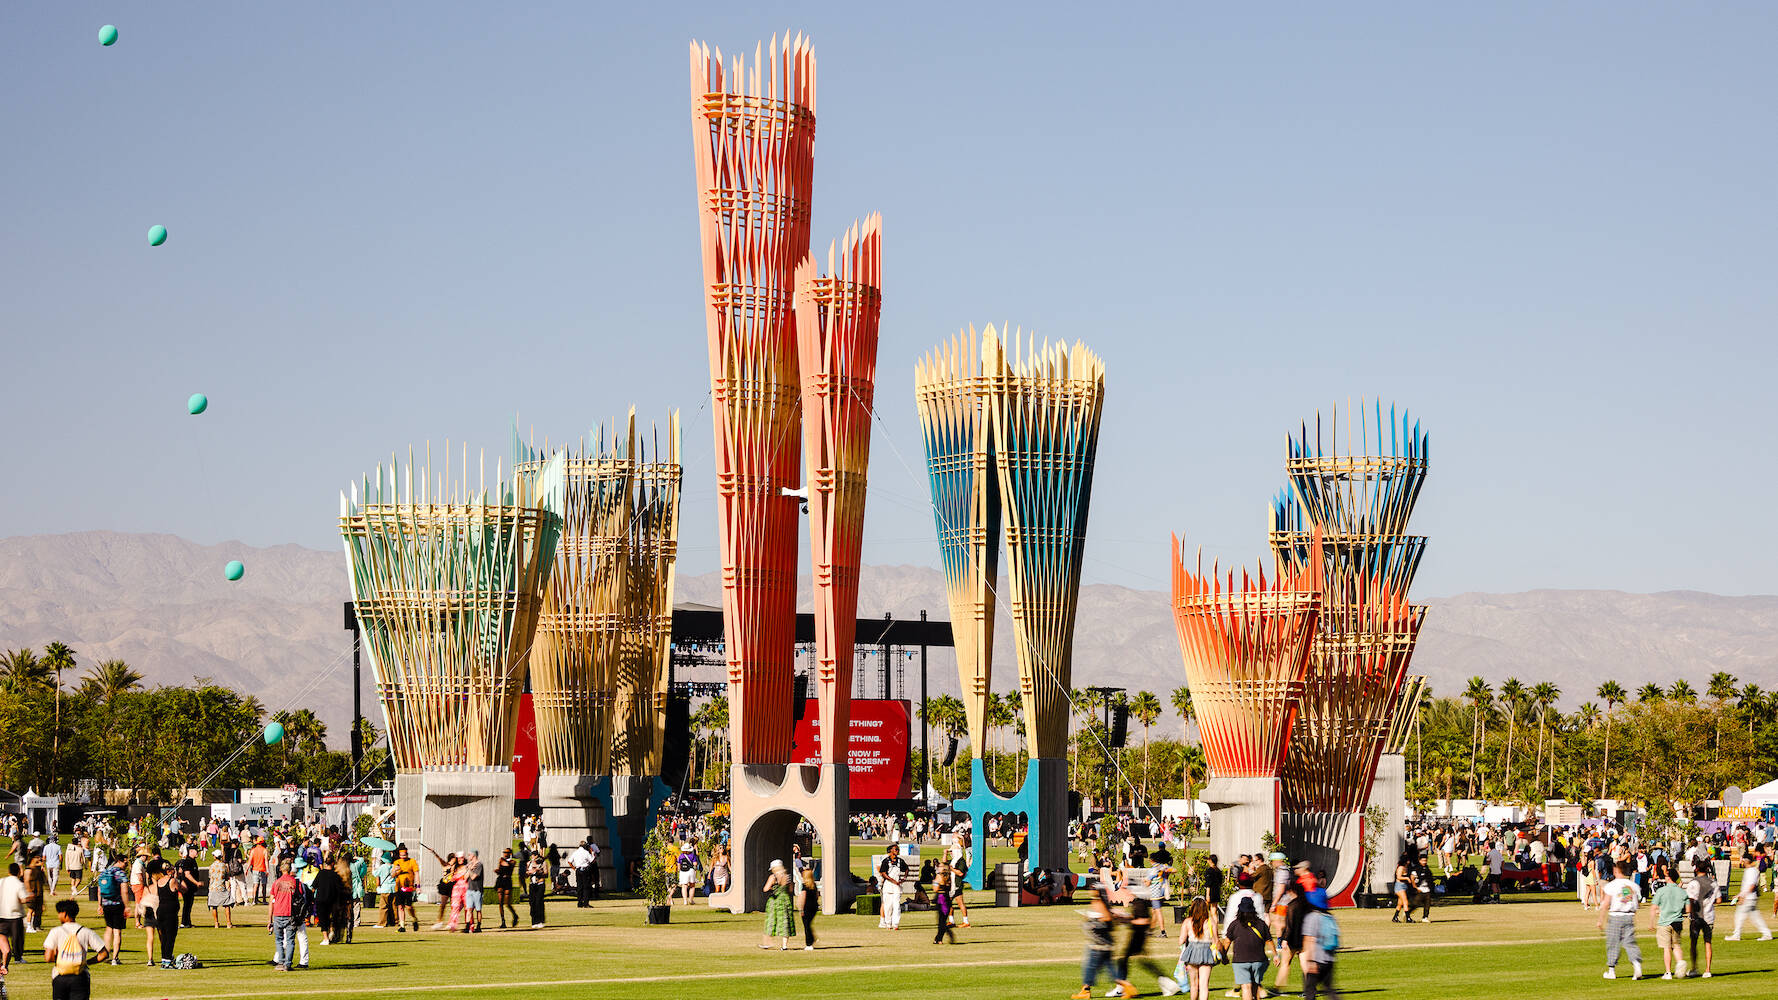 Coachella Festival Installations are Permanently Shaping the Public Spaces of Surrounding Communities